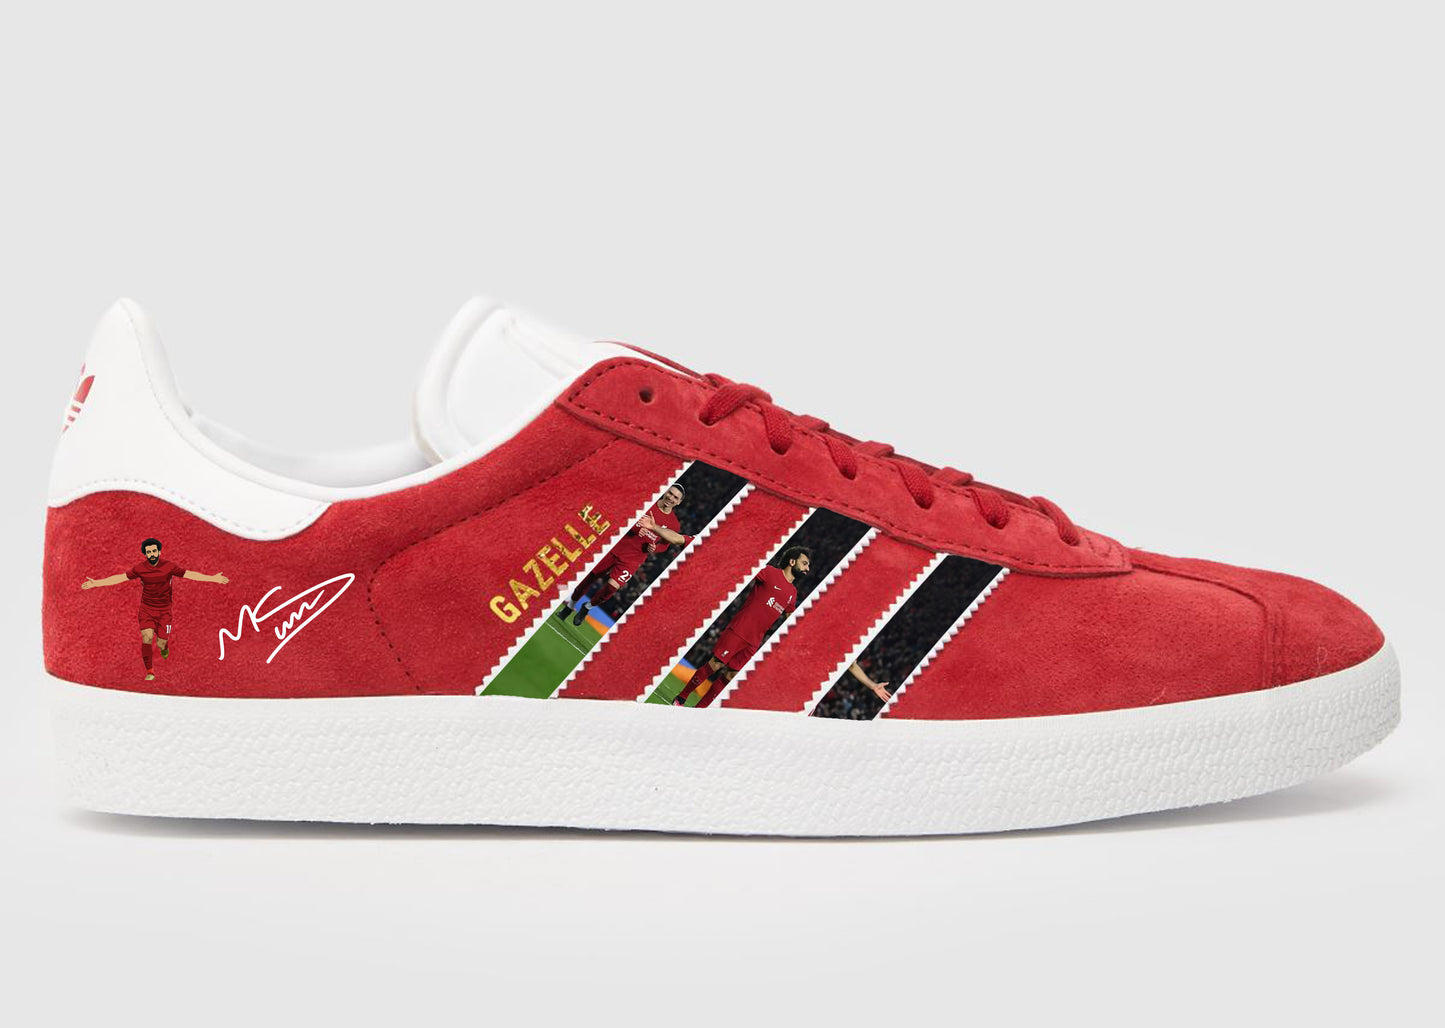 Limited edition Liverpool FC Mo Salah inspired red / white Adidas custom Gazelle trainers / sneakers